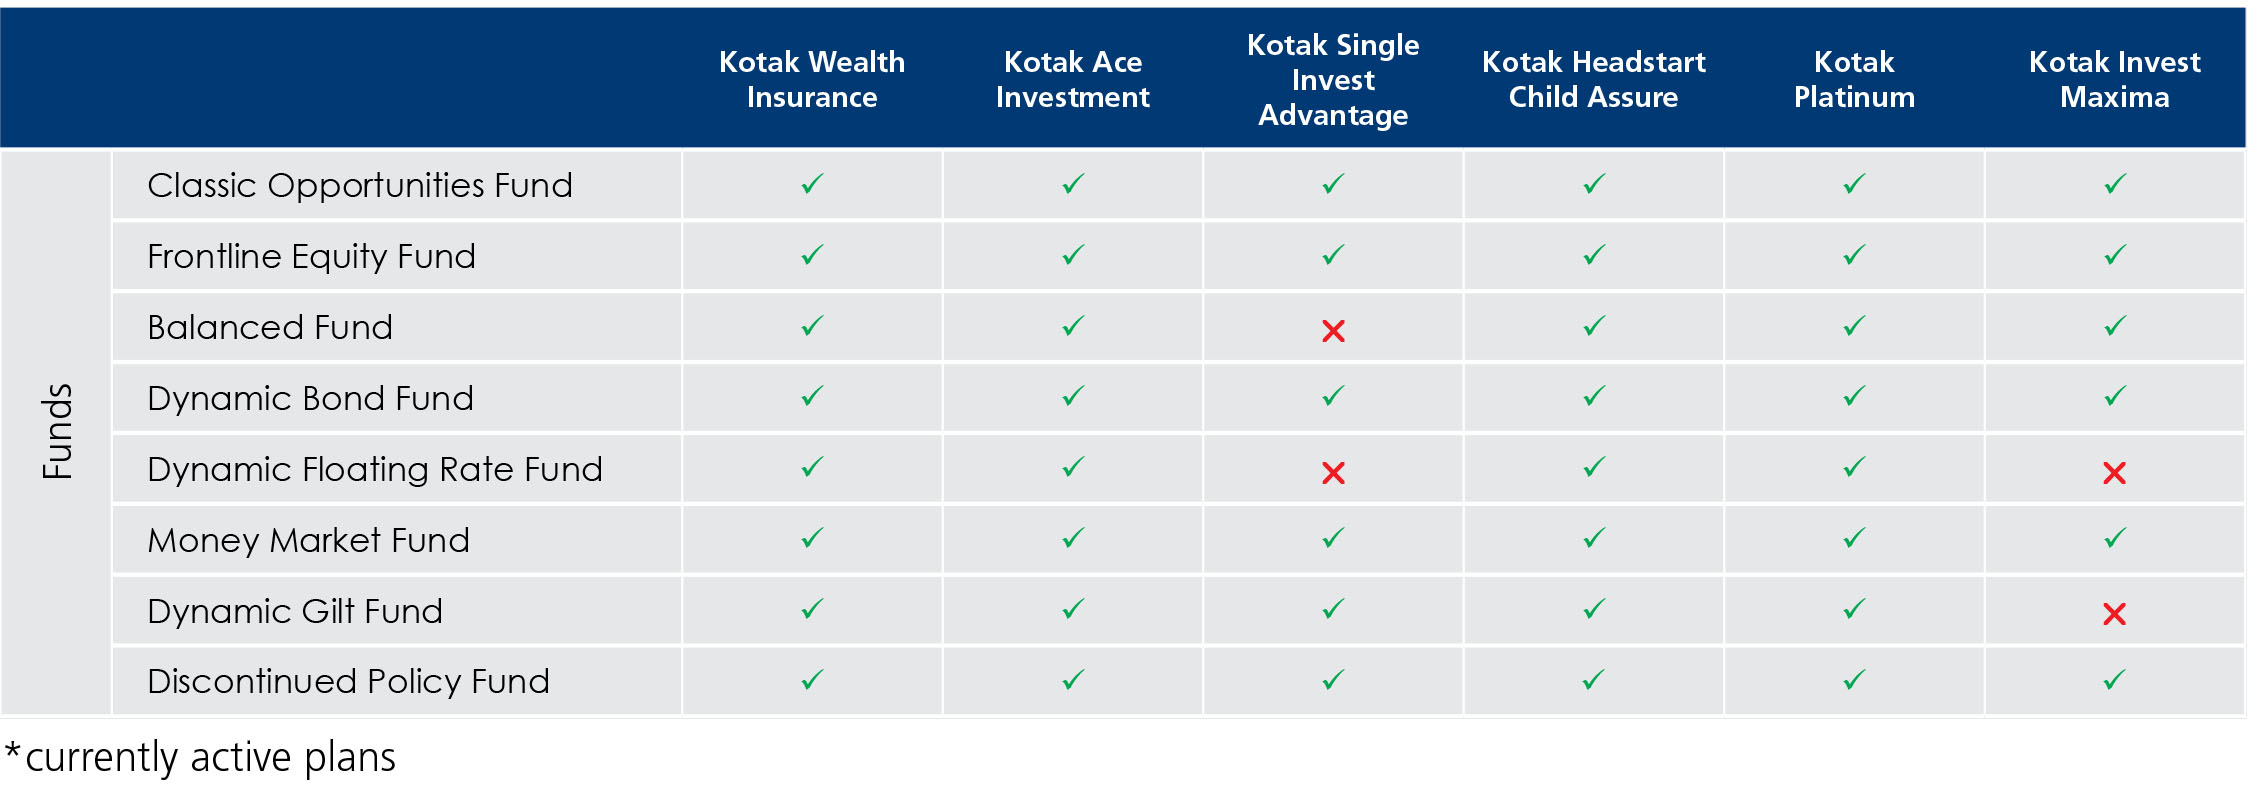  Currently  active investment  plans of Kotak Group 